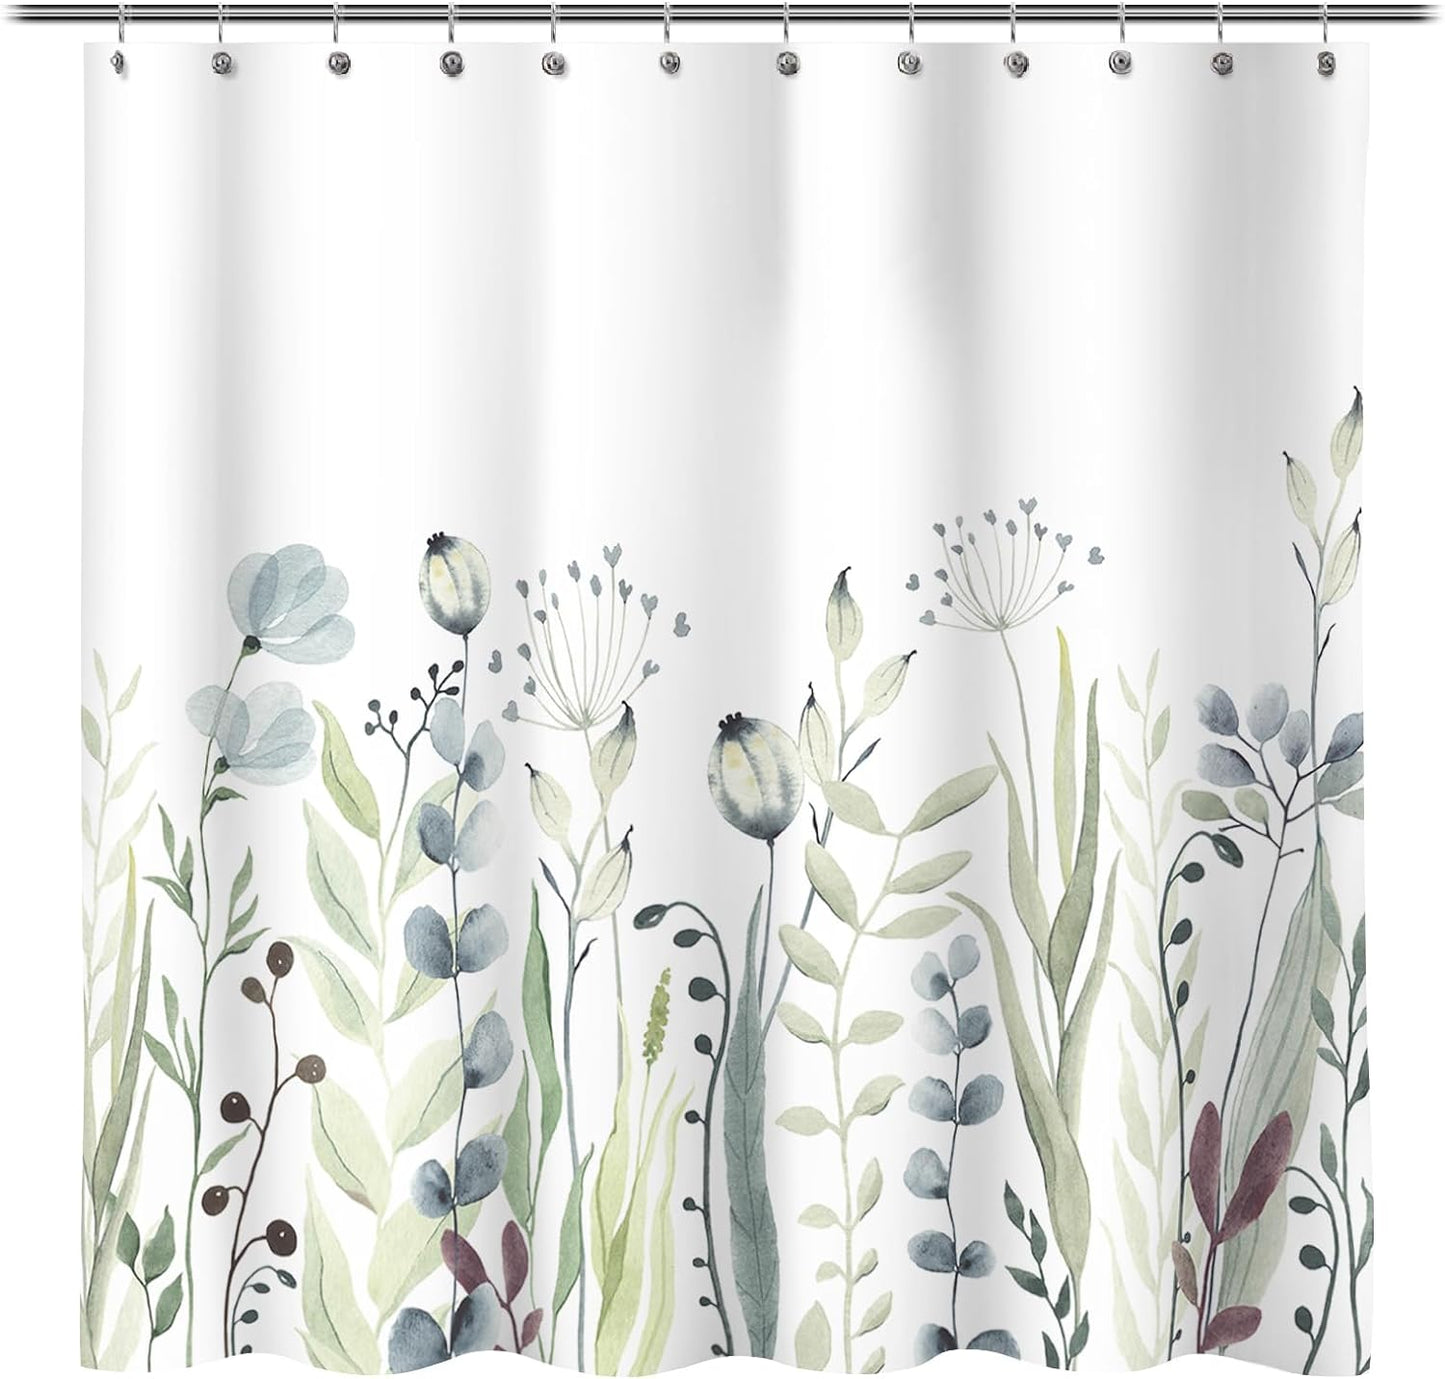 Floral Plant Fabric Shower Curtain, Spring Blue and Green Flower Shower Curtains for Home Decor, Botanical Bath Curtain for Bathroom Washable, 71x71